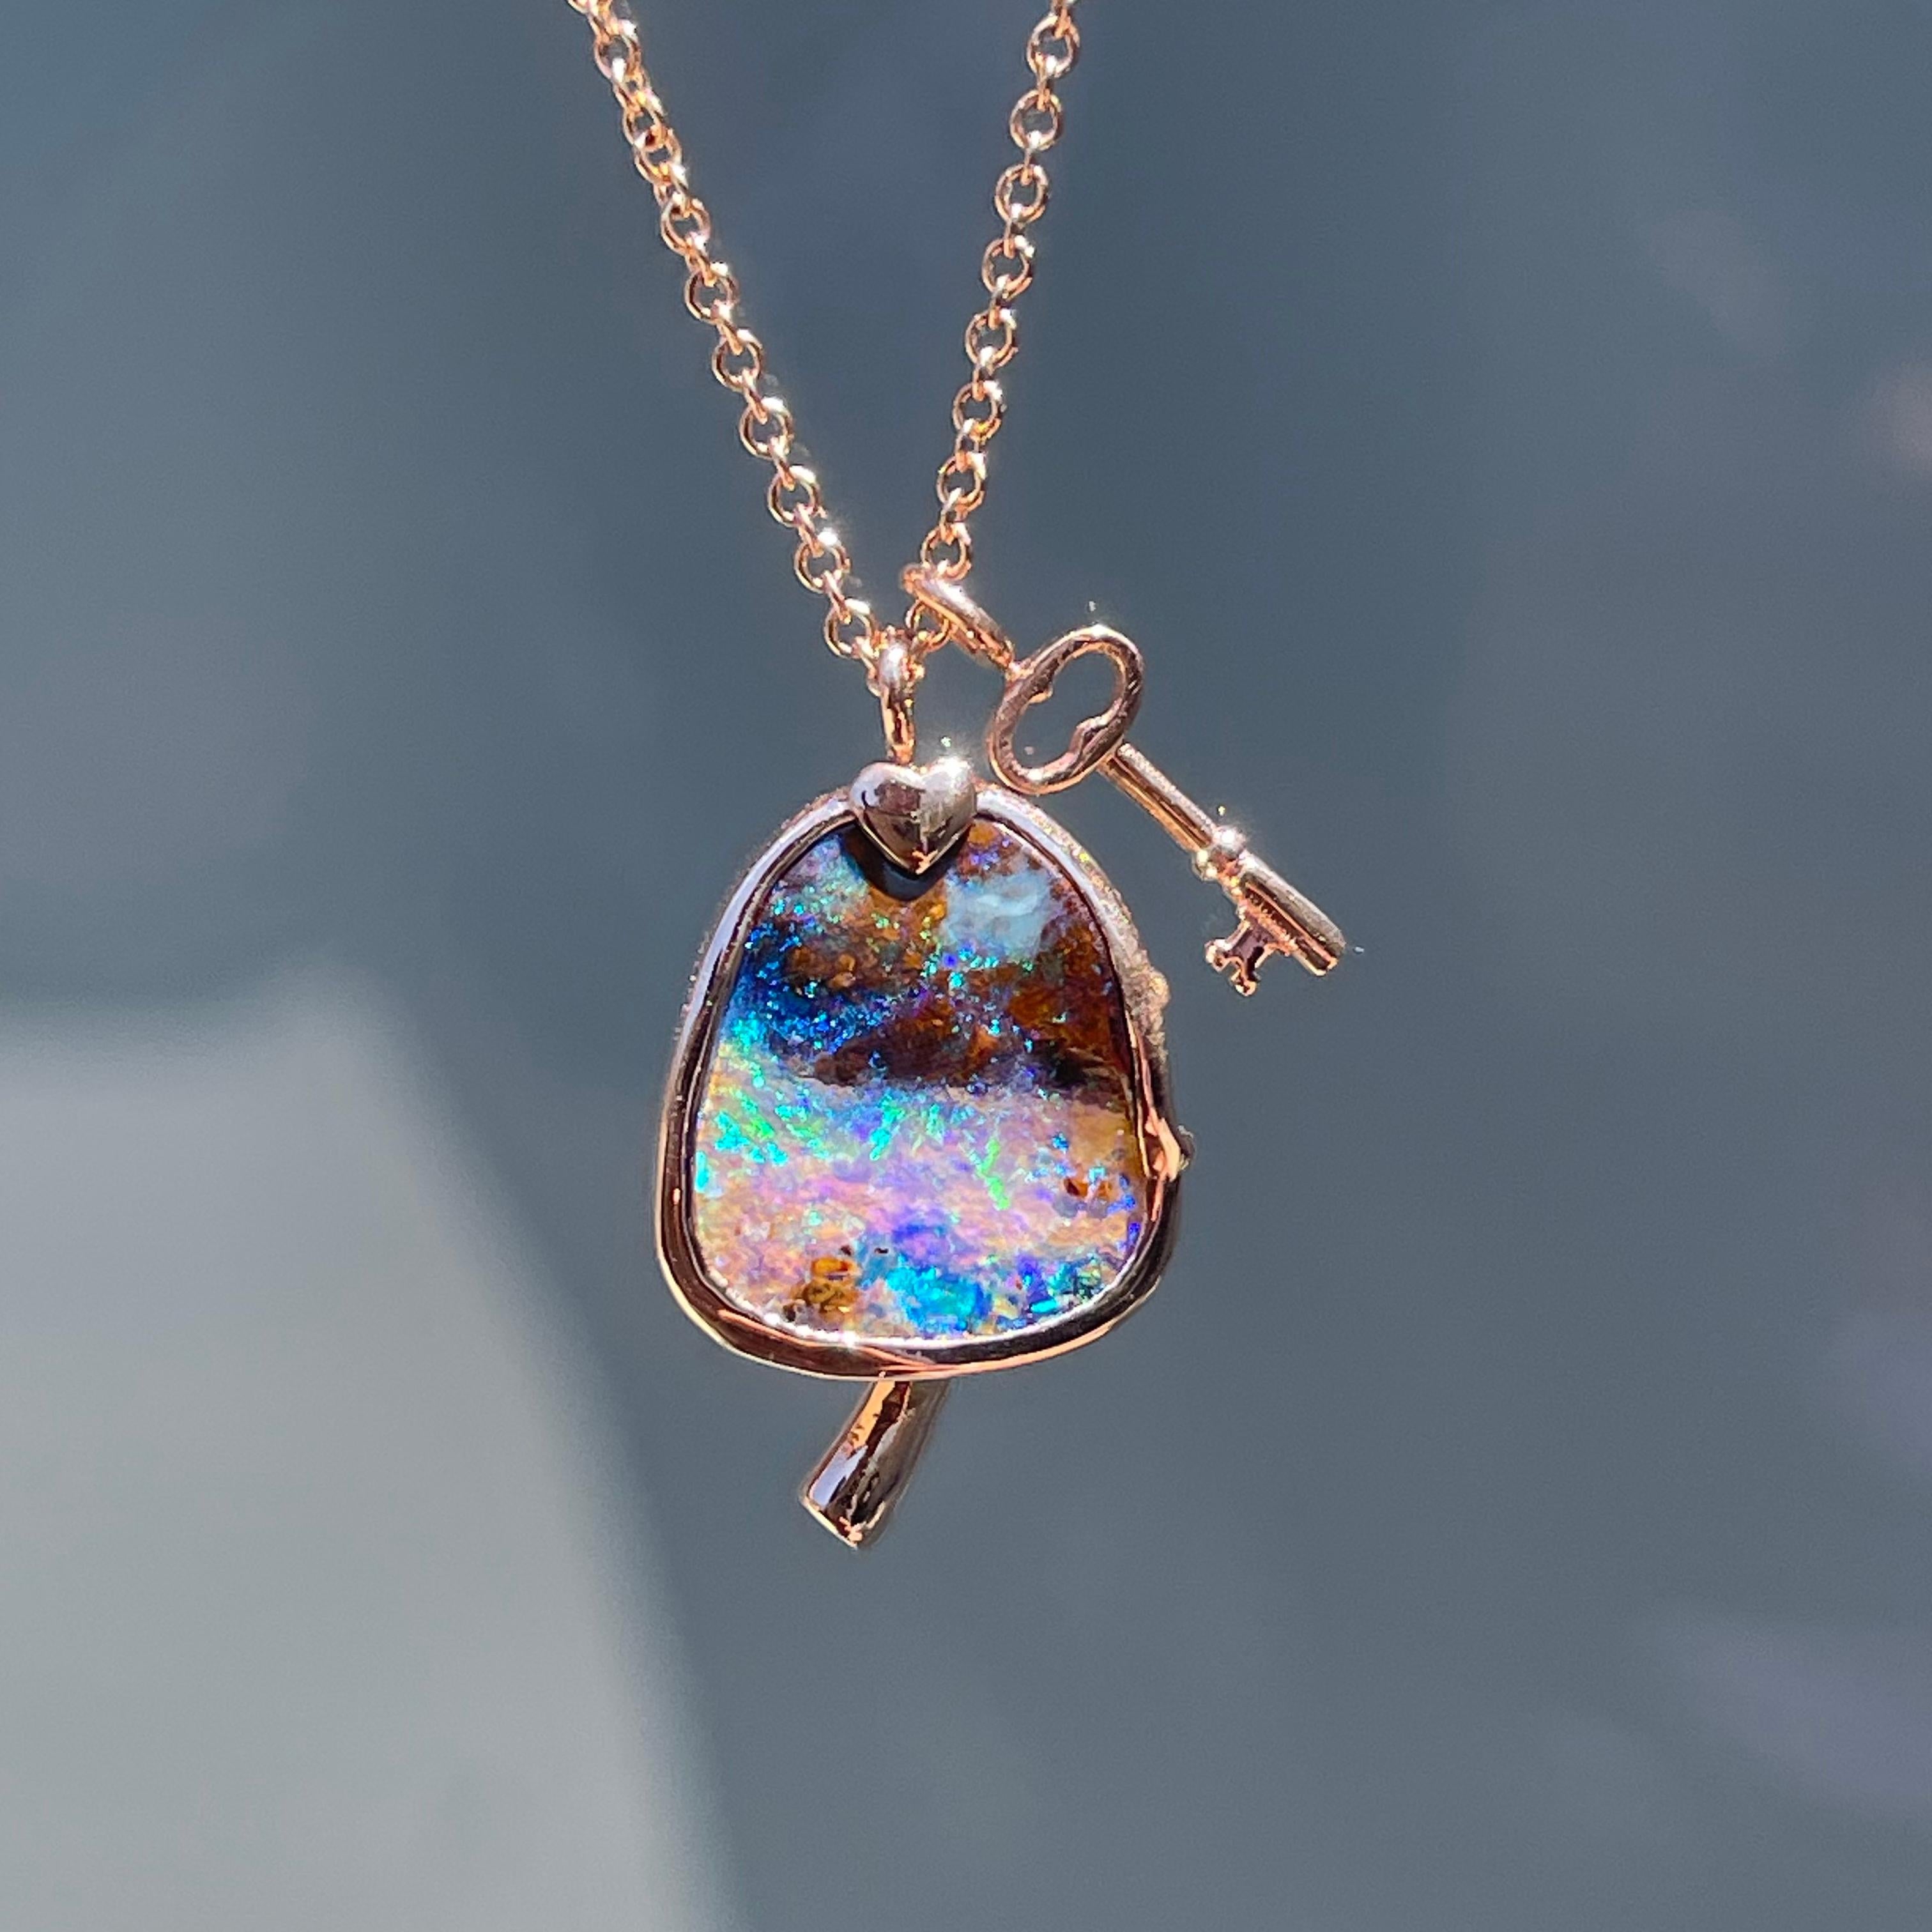 Imagination swells and alchemy manifests in this Australian Opal Necklace. The illusory Boulder Opal conjures greens and blues that pulse across its mushroom cap. A sparkling emerald plugs the stem that emerges from the base of the hypnotic stone.